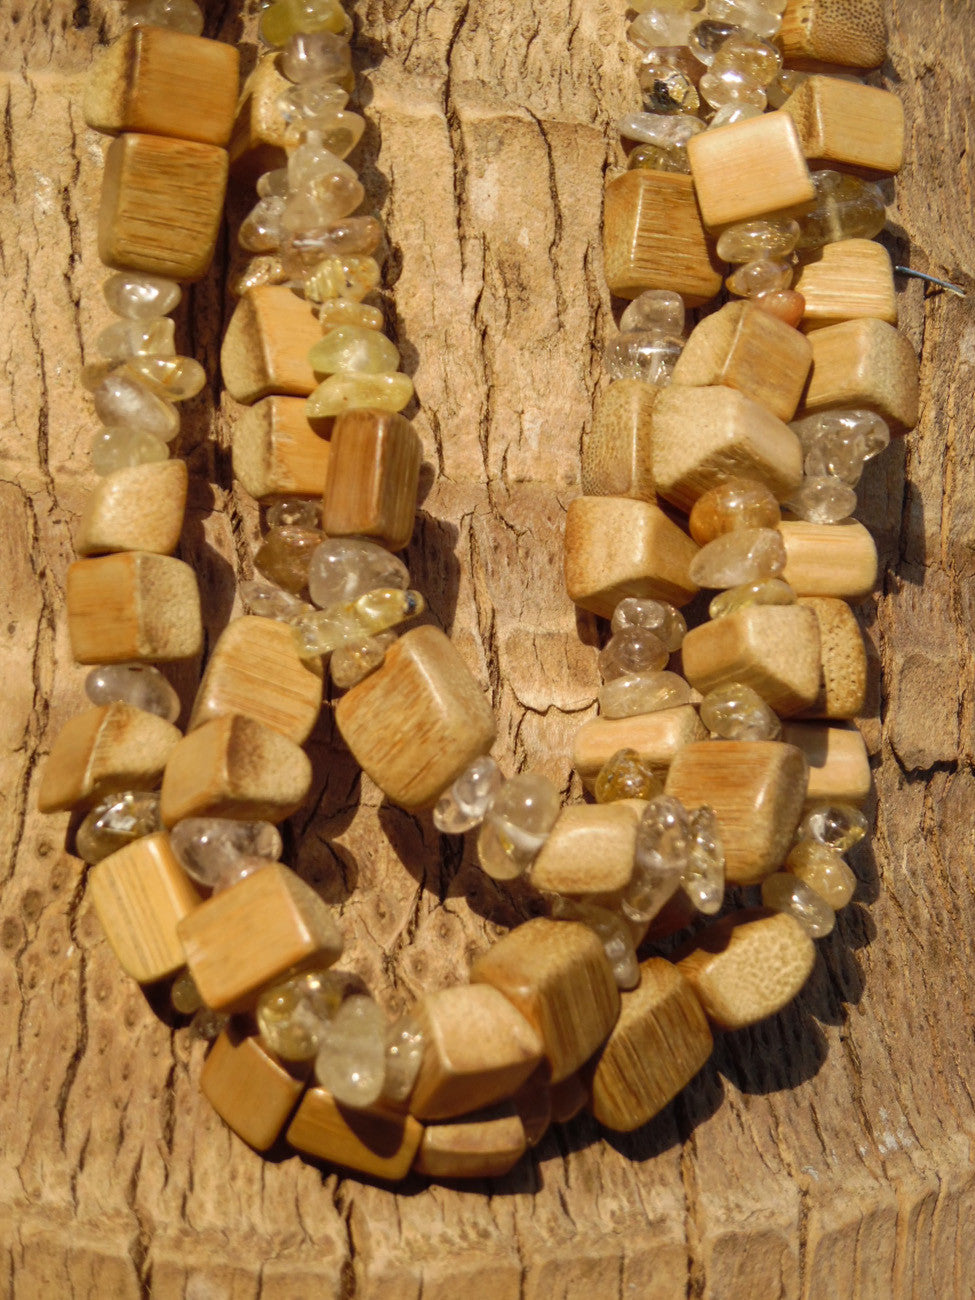 Necklace Triple Strand Rutillated Quartz and Wood